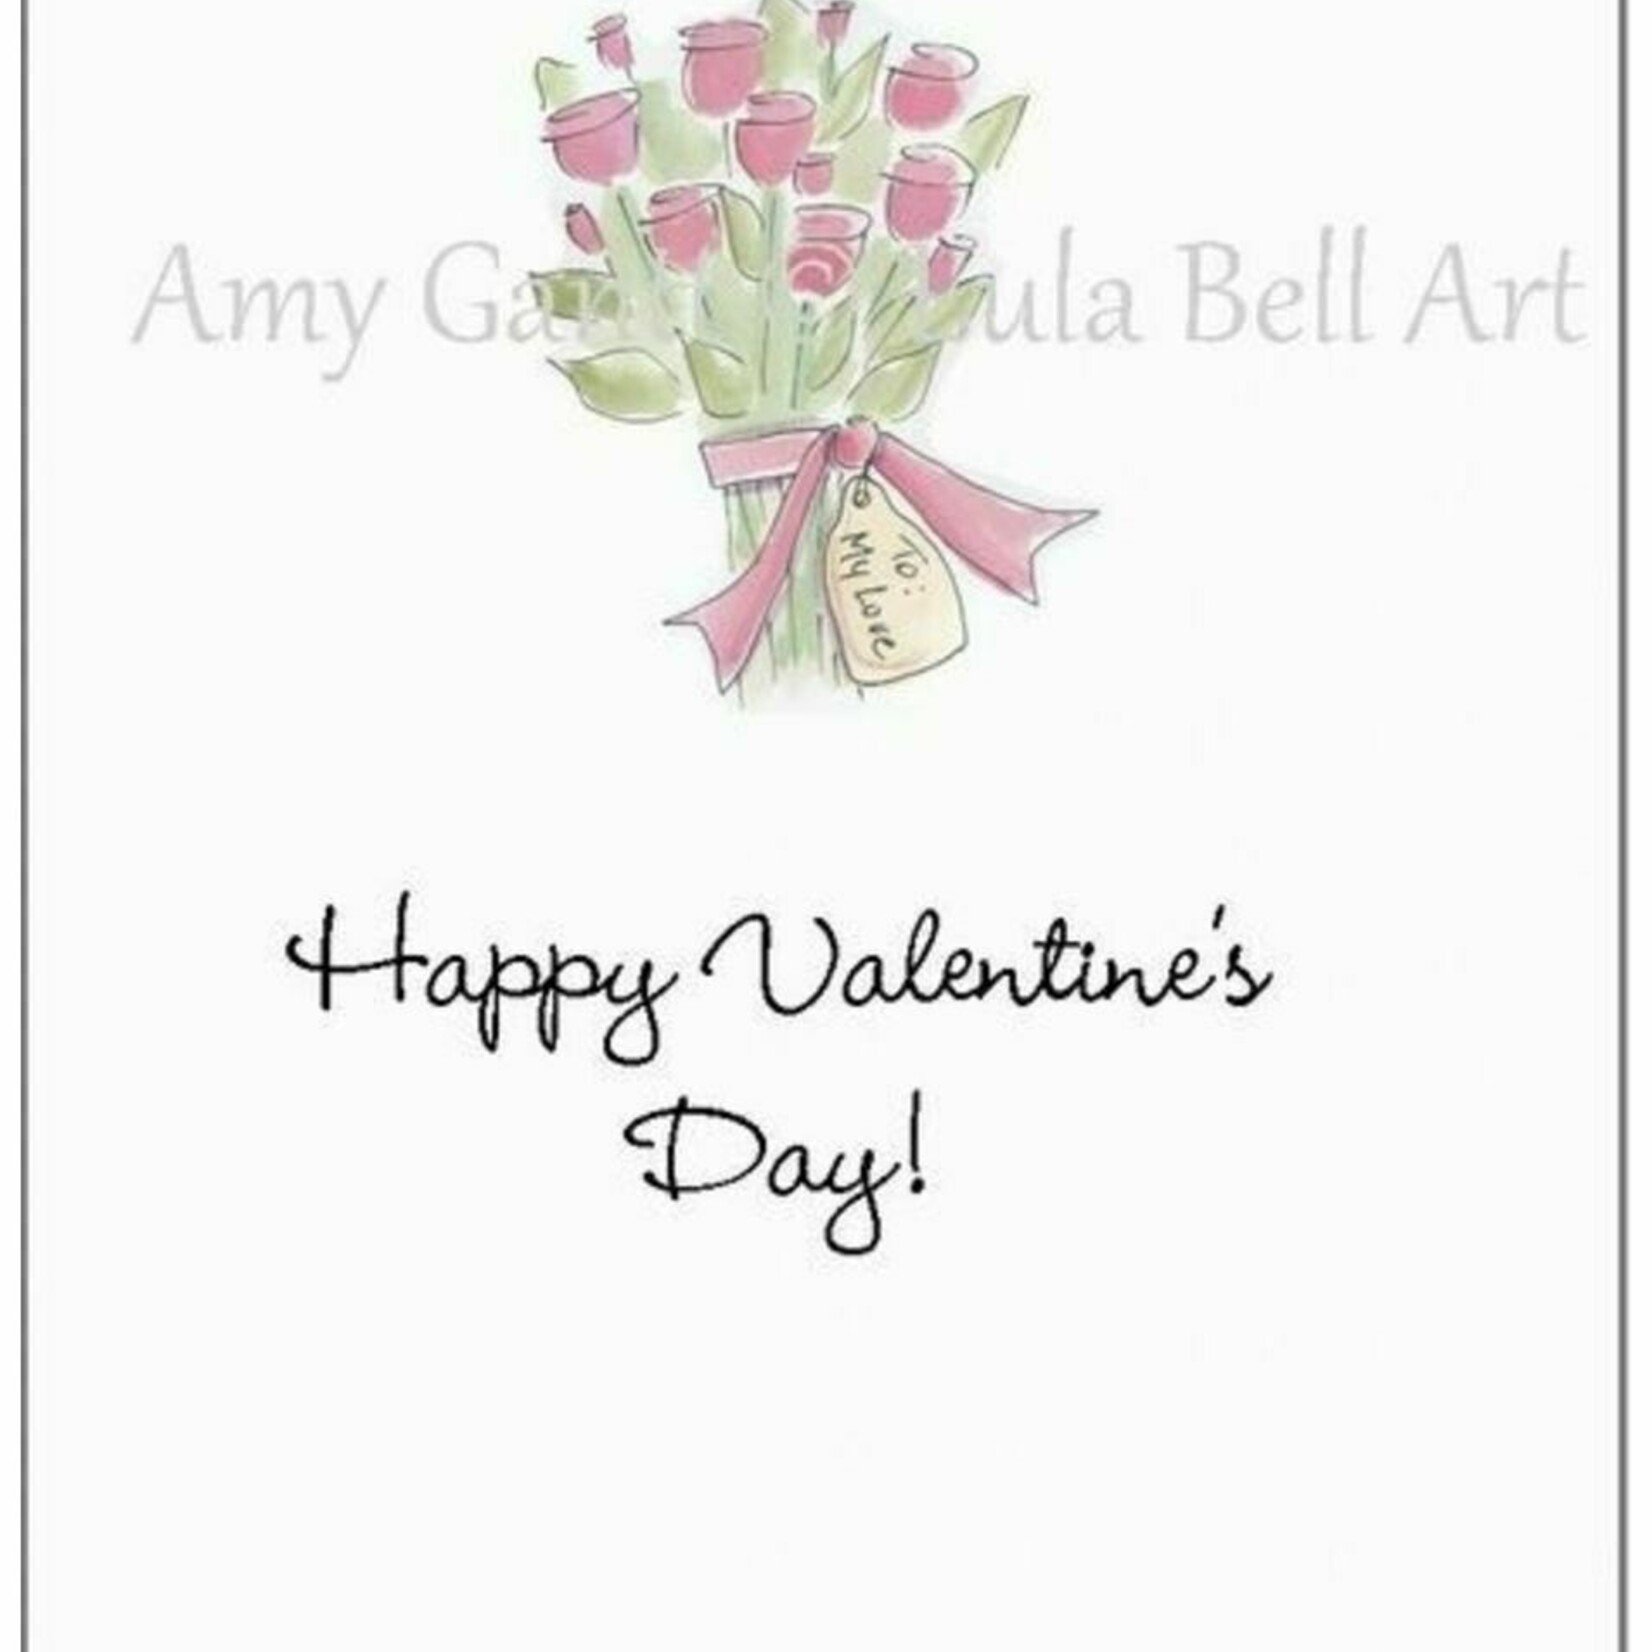 Lula Bell Cards & Gifts Valentines Day Card: Love You Bunches